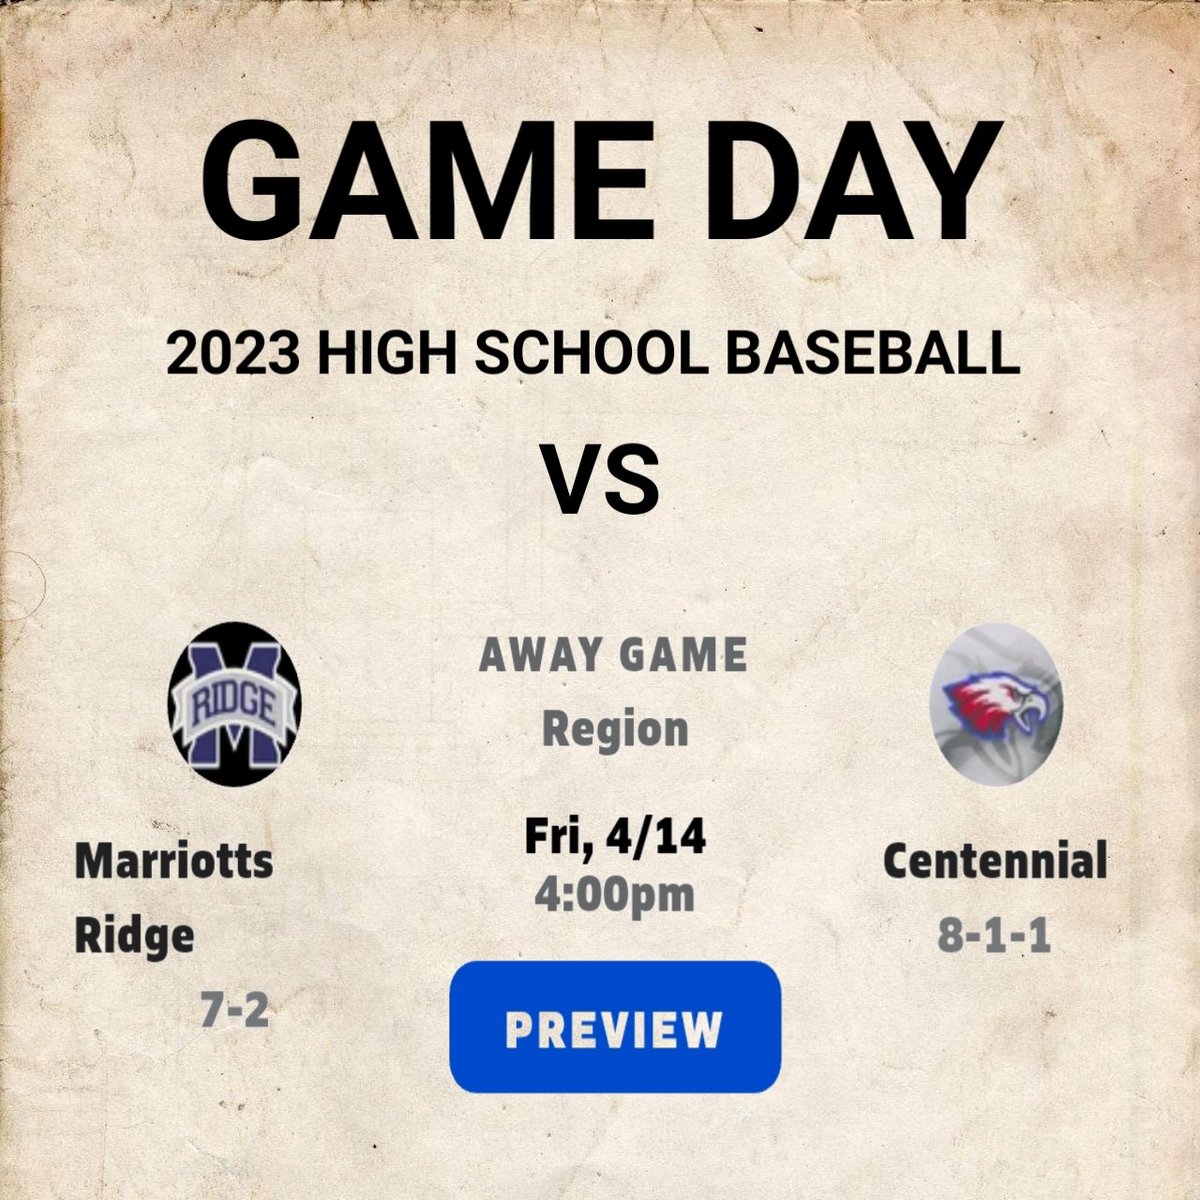 Fri., Apr. 14, 2023 @ 4p
The Centennial (Ellicott City, MD) varsity baseball team has a home conference game vs. Marriotts Ridge (Marriottsville, MD) today @ 4p.
Watch On ⬇️
📺  bit.ly/3JS3twx
@CHSEagleSports @hcpss_chs @hcpss_mrhs